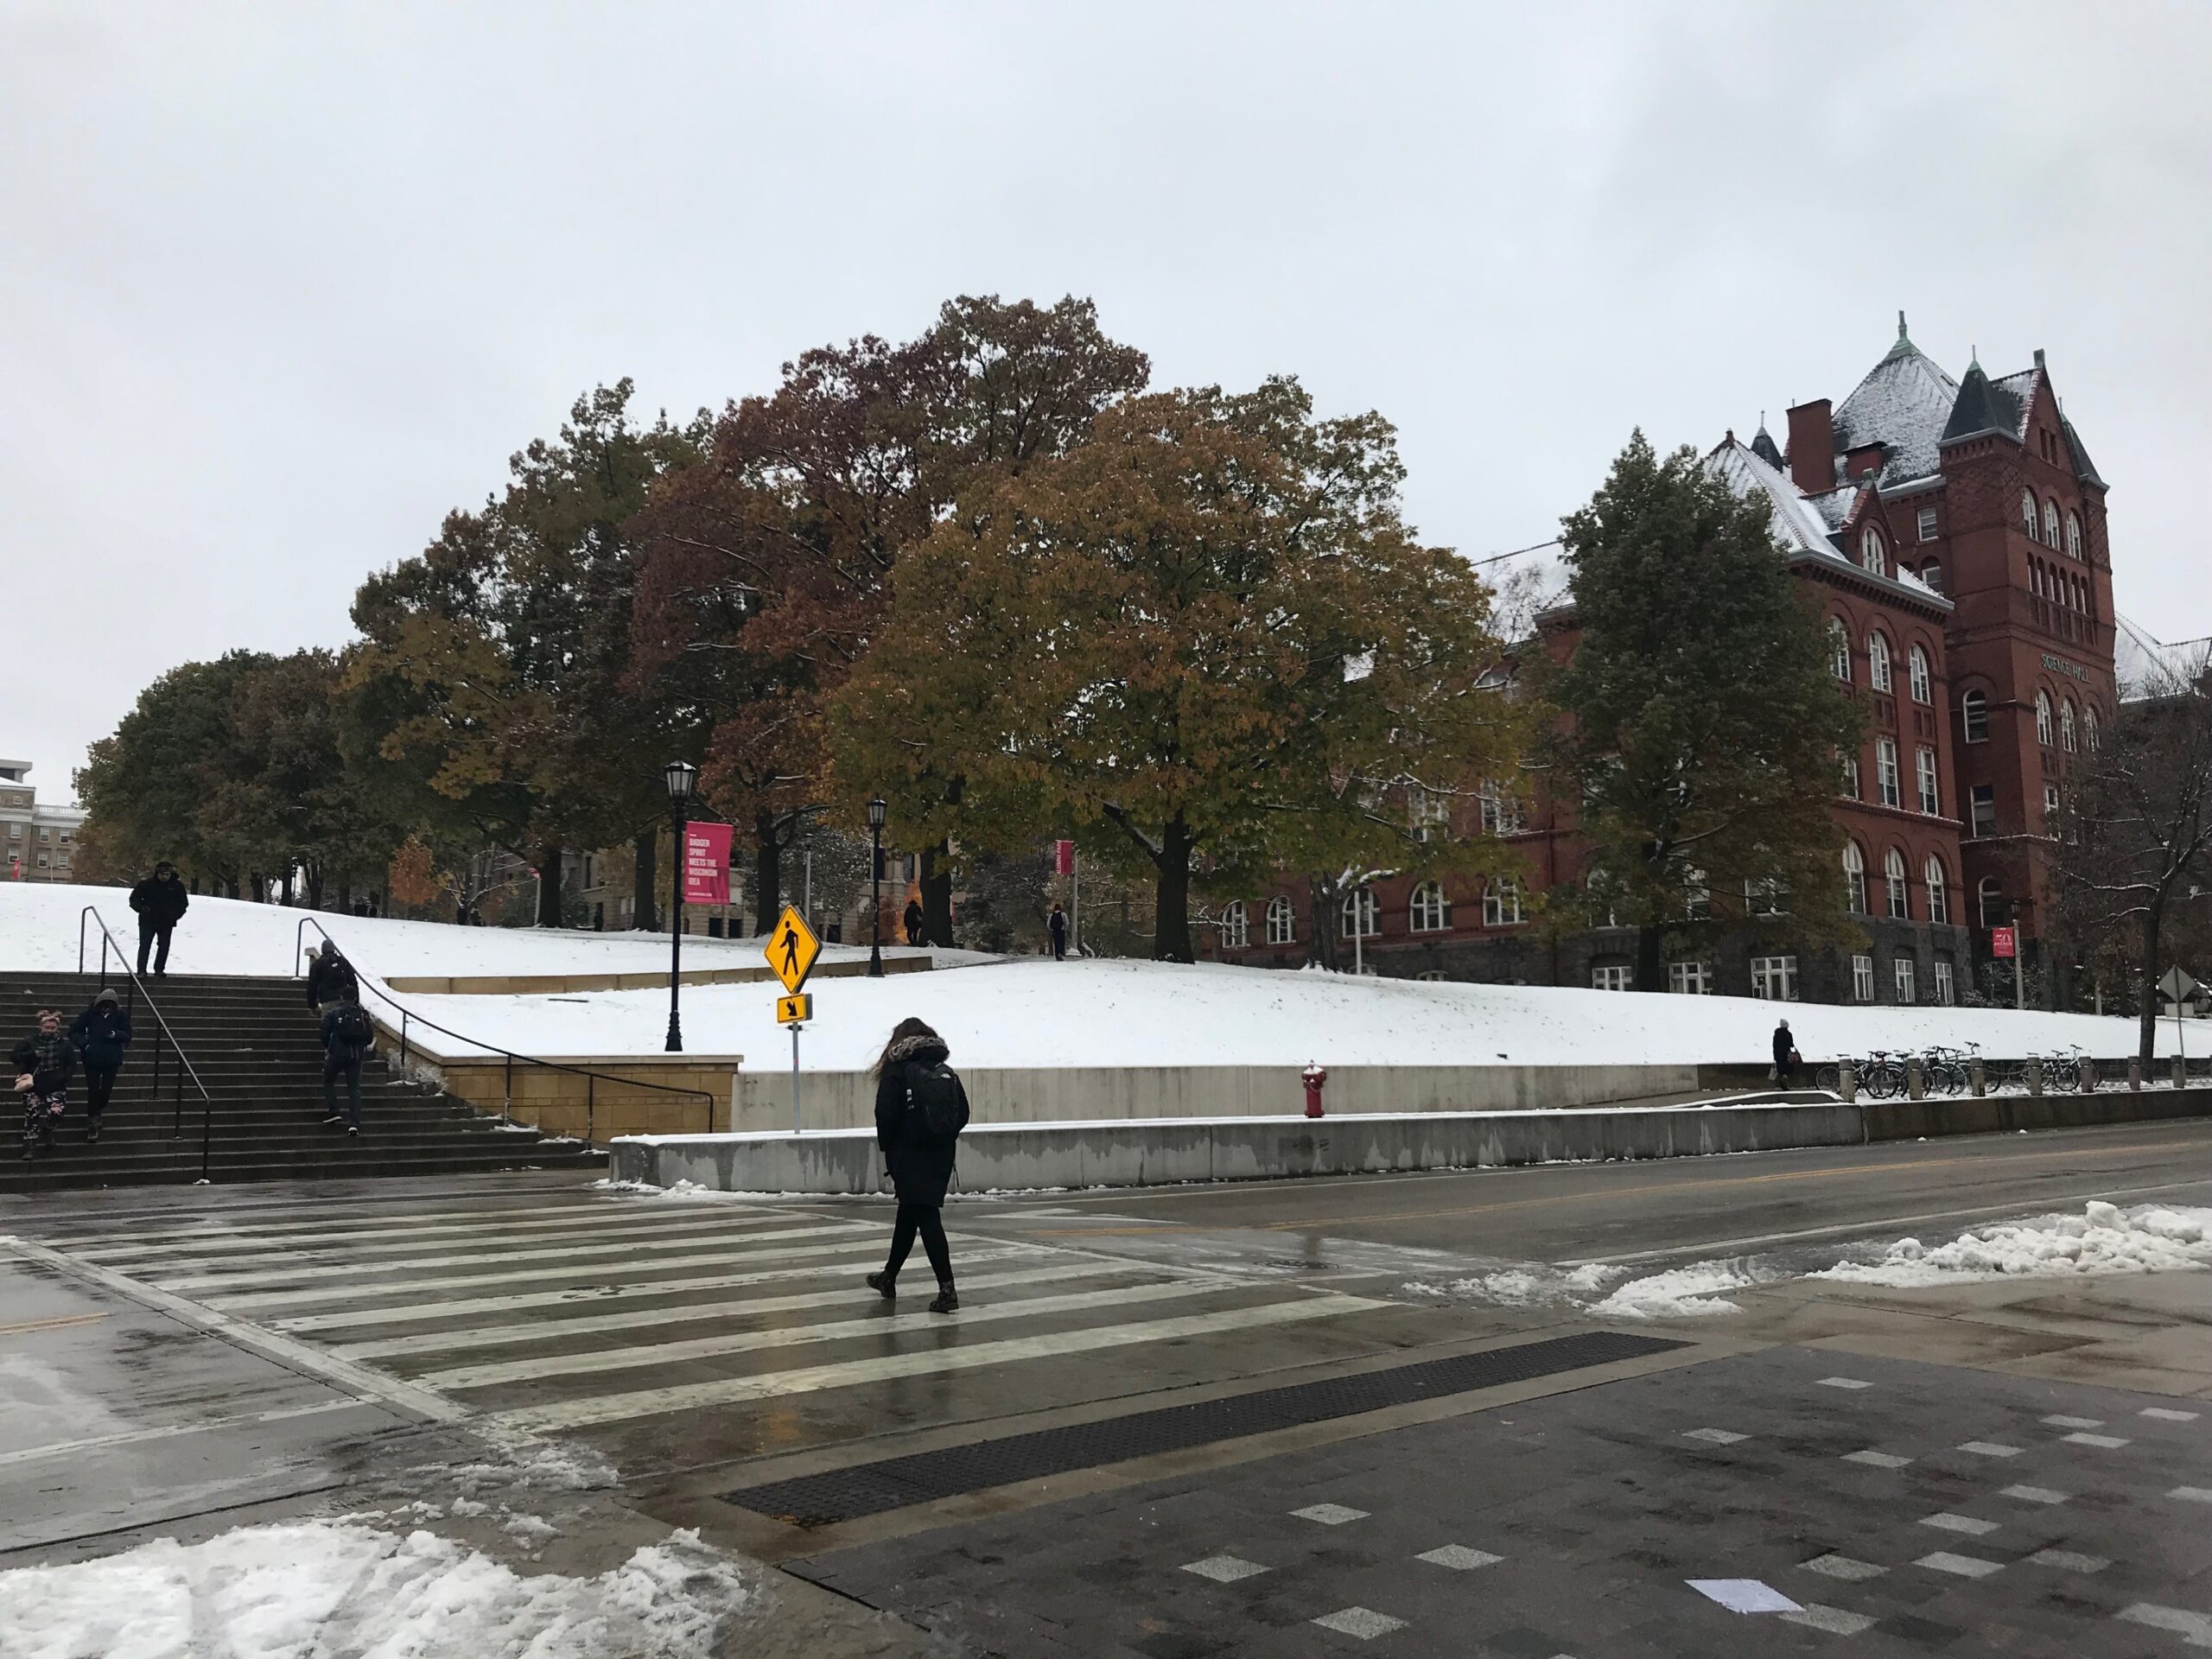 Students cross the street to and from a snowy quad, where the trees still have colorful autumn leaves.